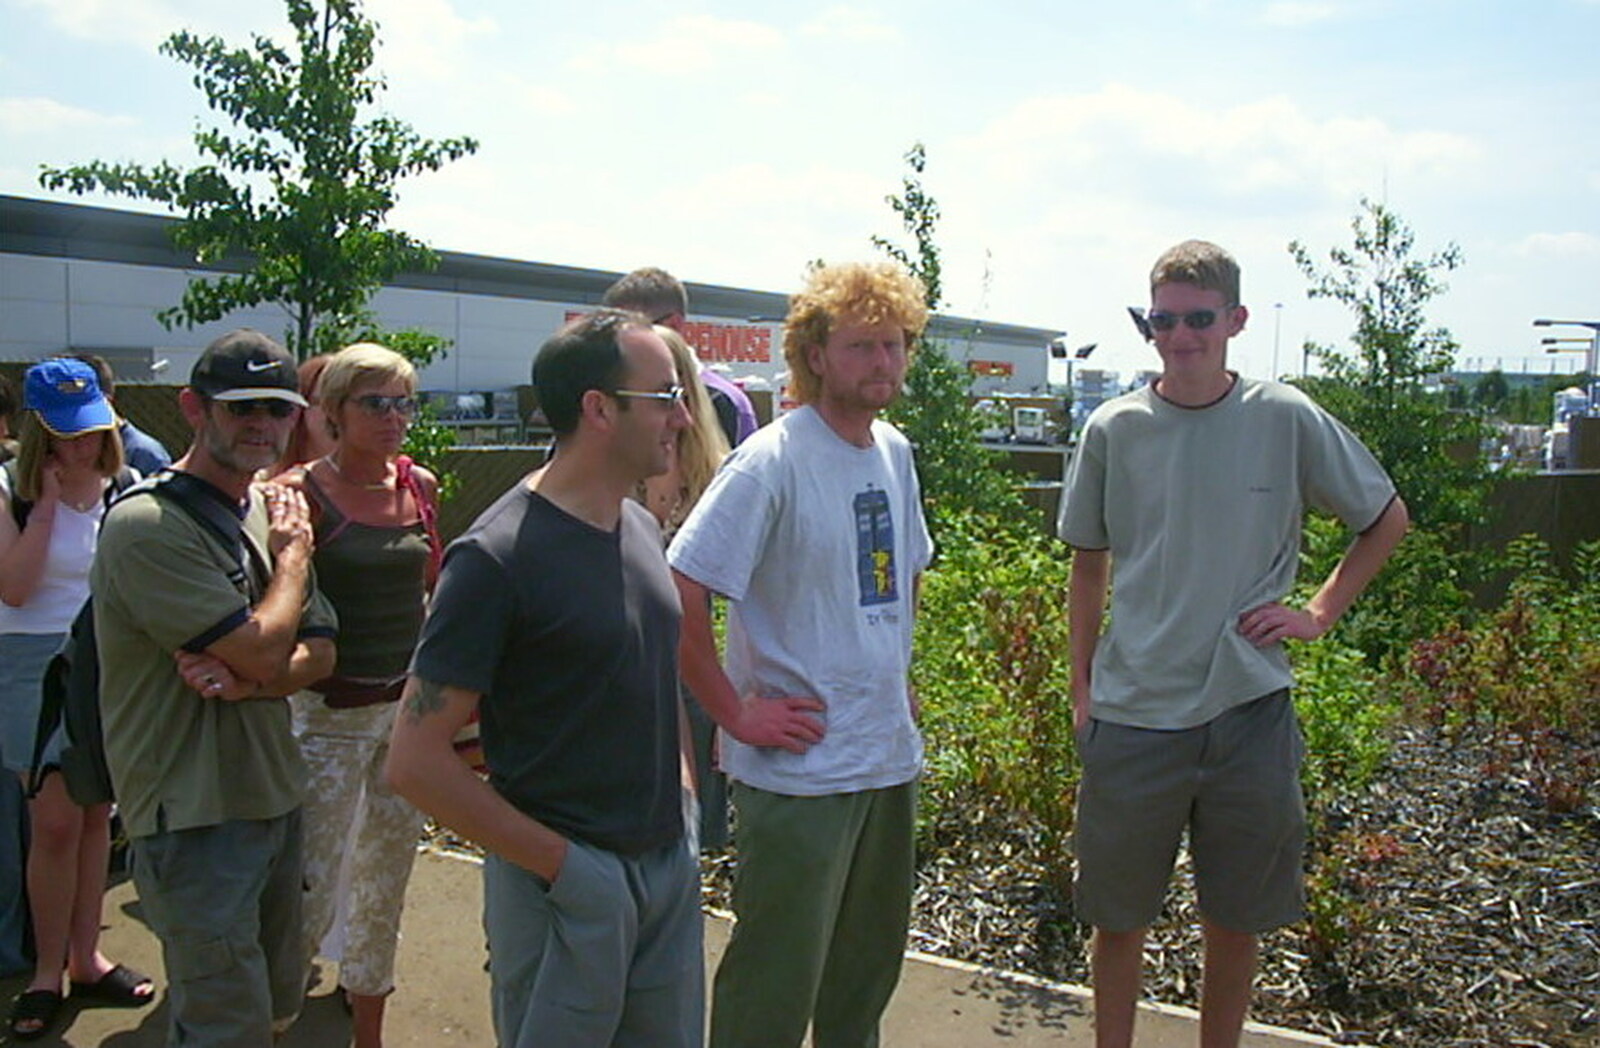 DH, Wavy and The Boy Phil in the queue from Radio 1's One Big Sunday, Chantry Park, Ipswich - 14th July 2002